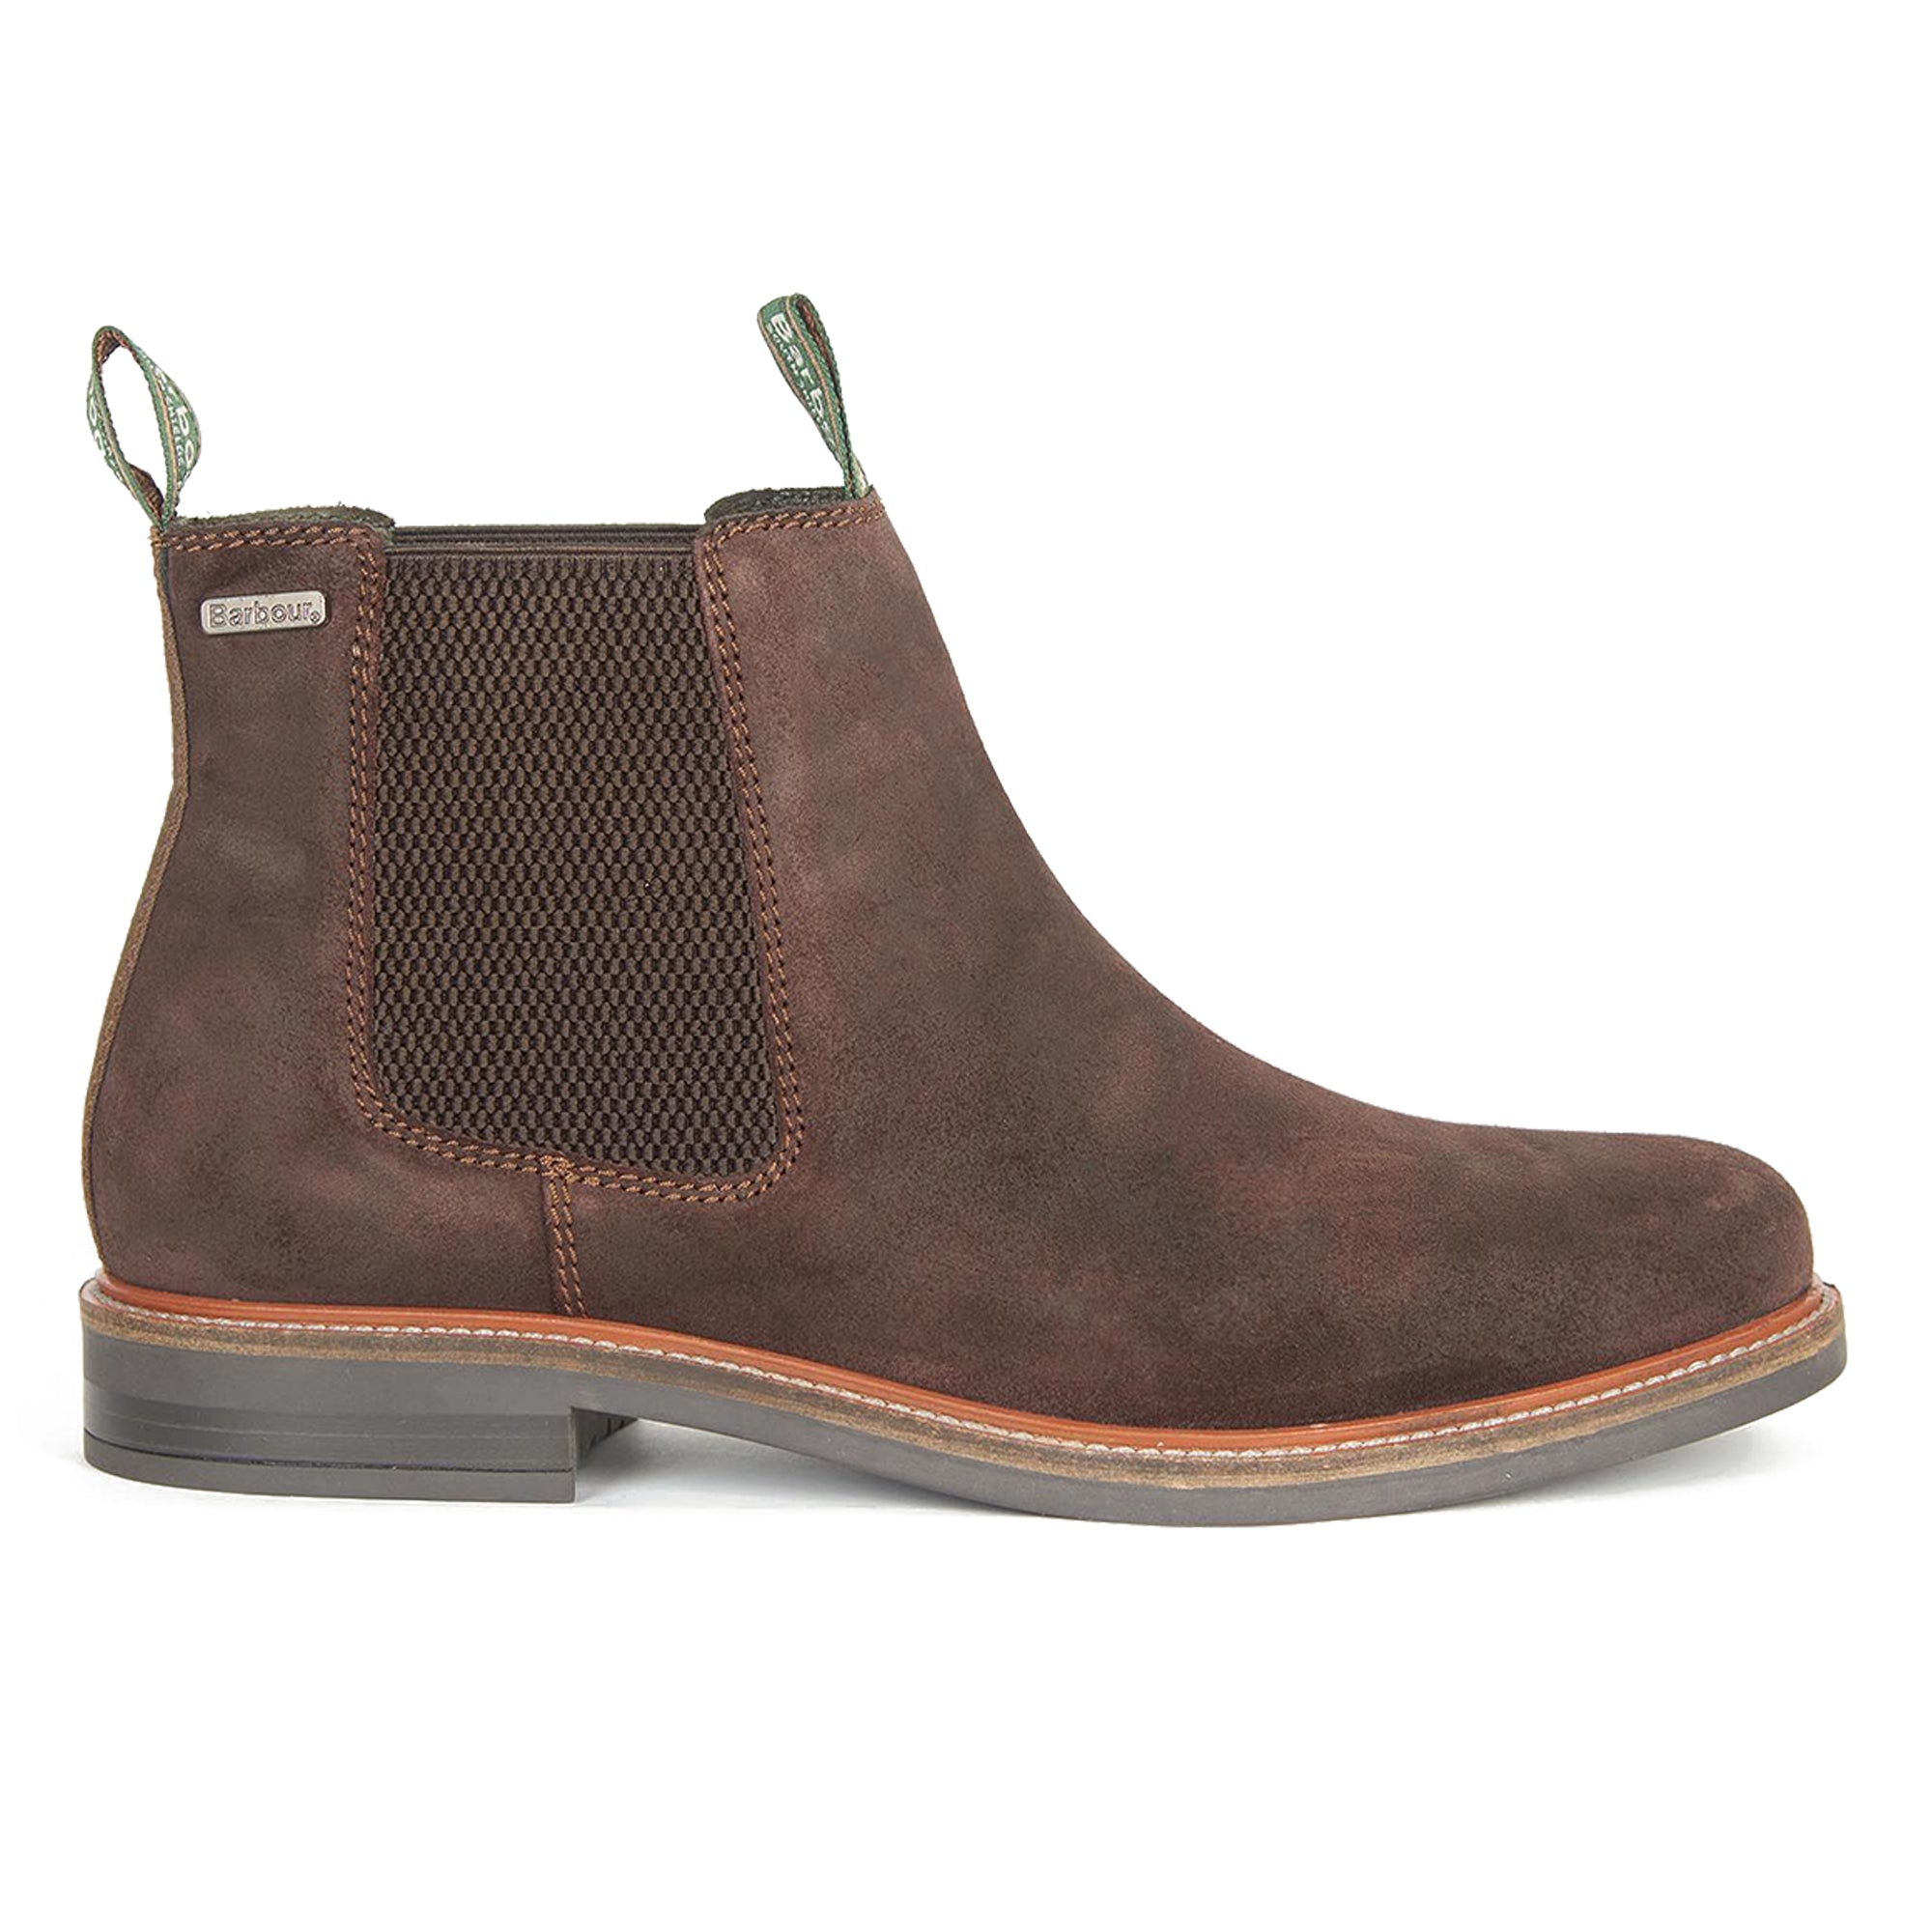 Barbour Farsley Chelsea Boot - Choco Suede